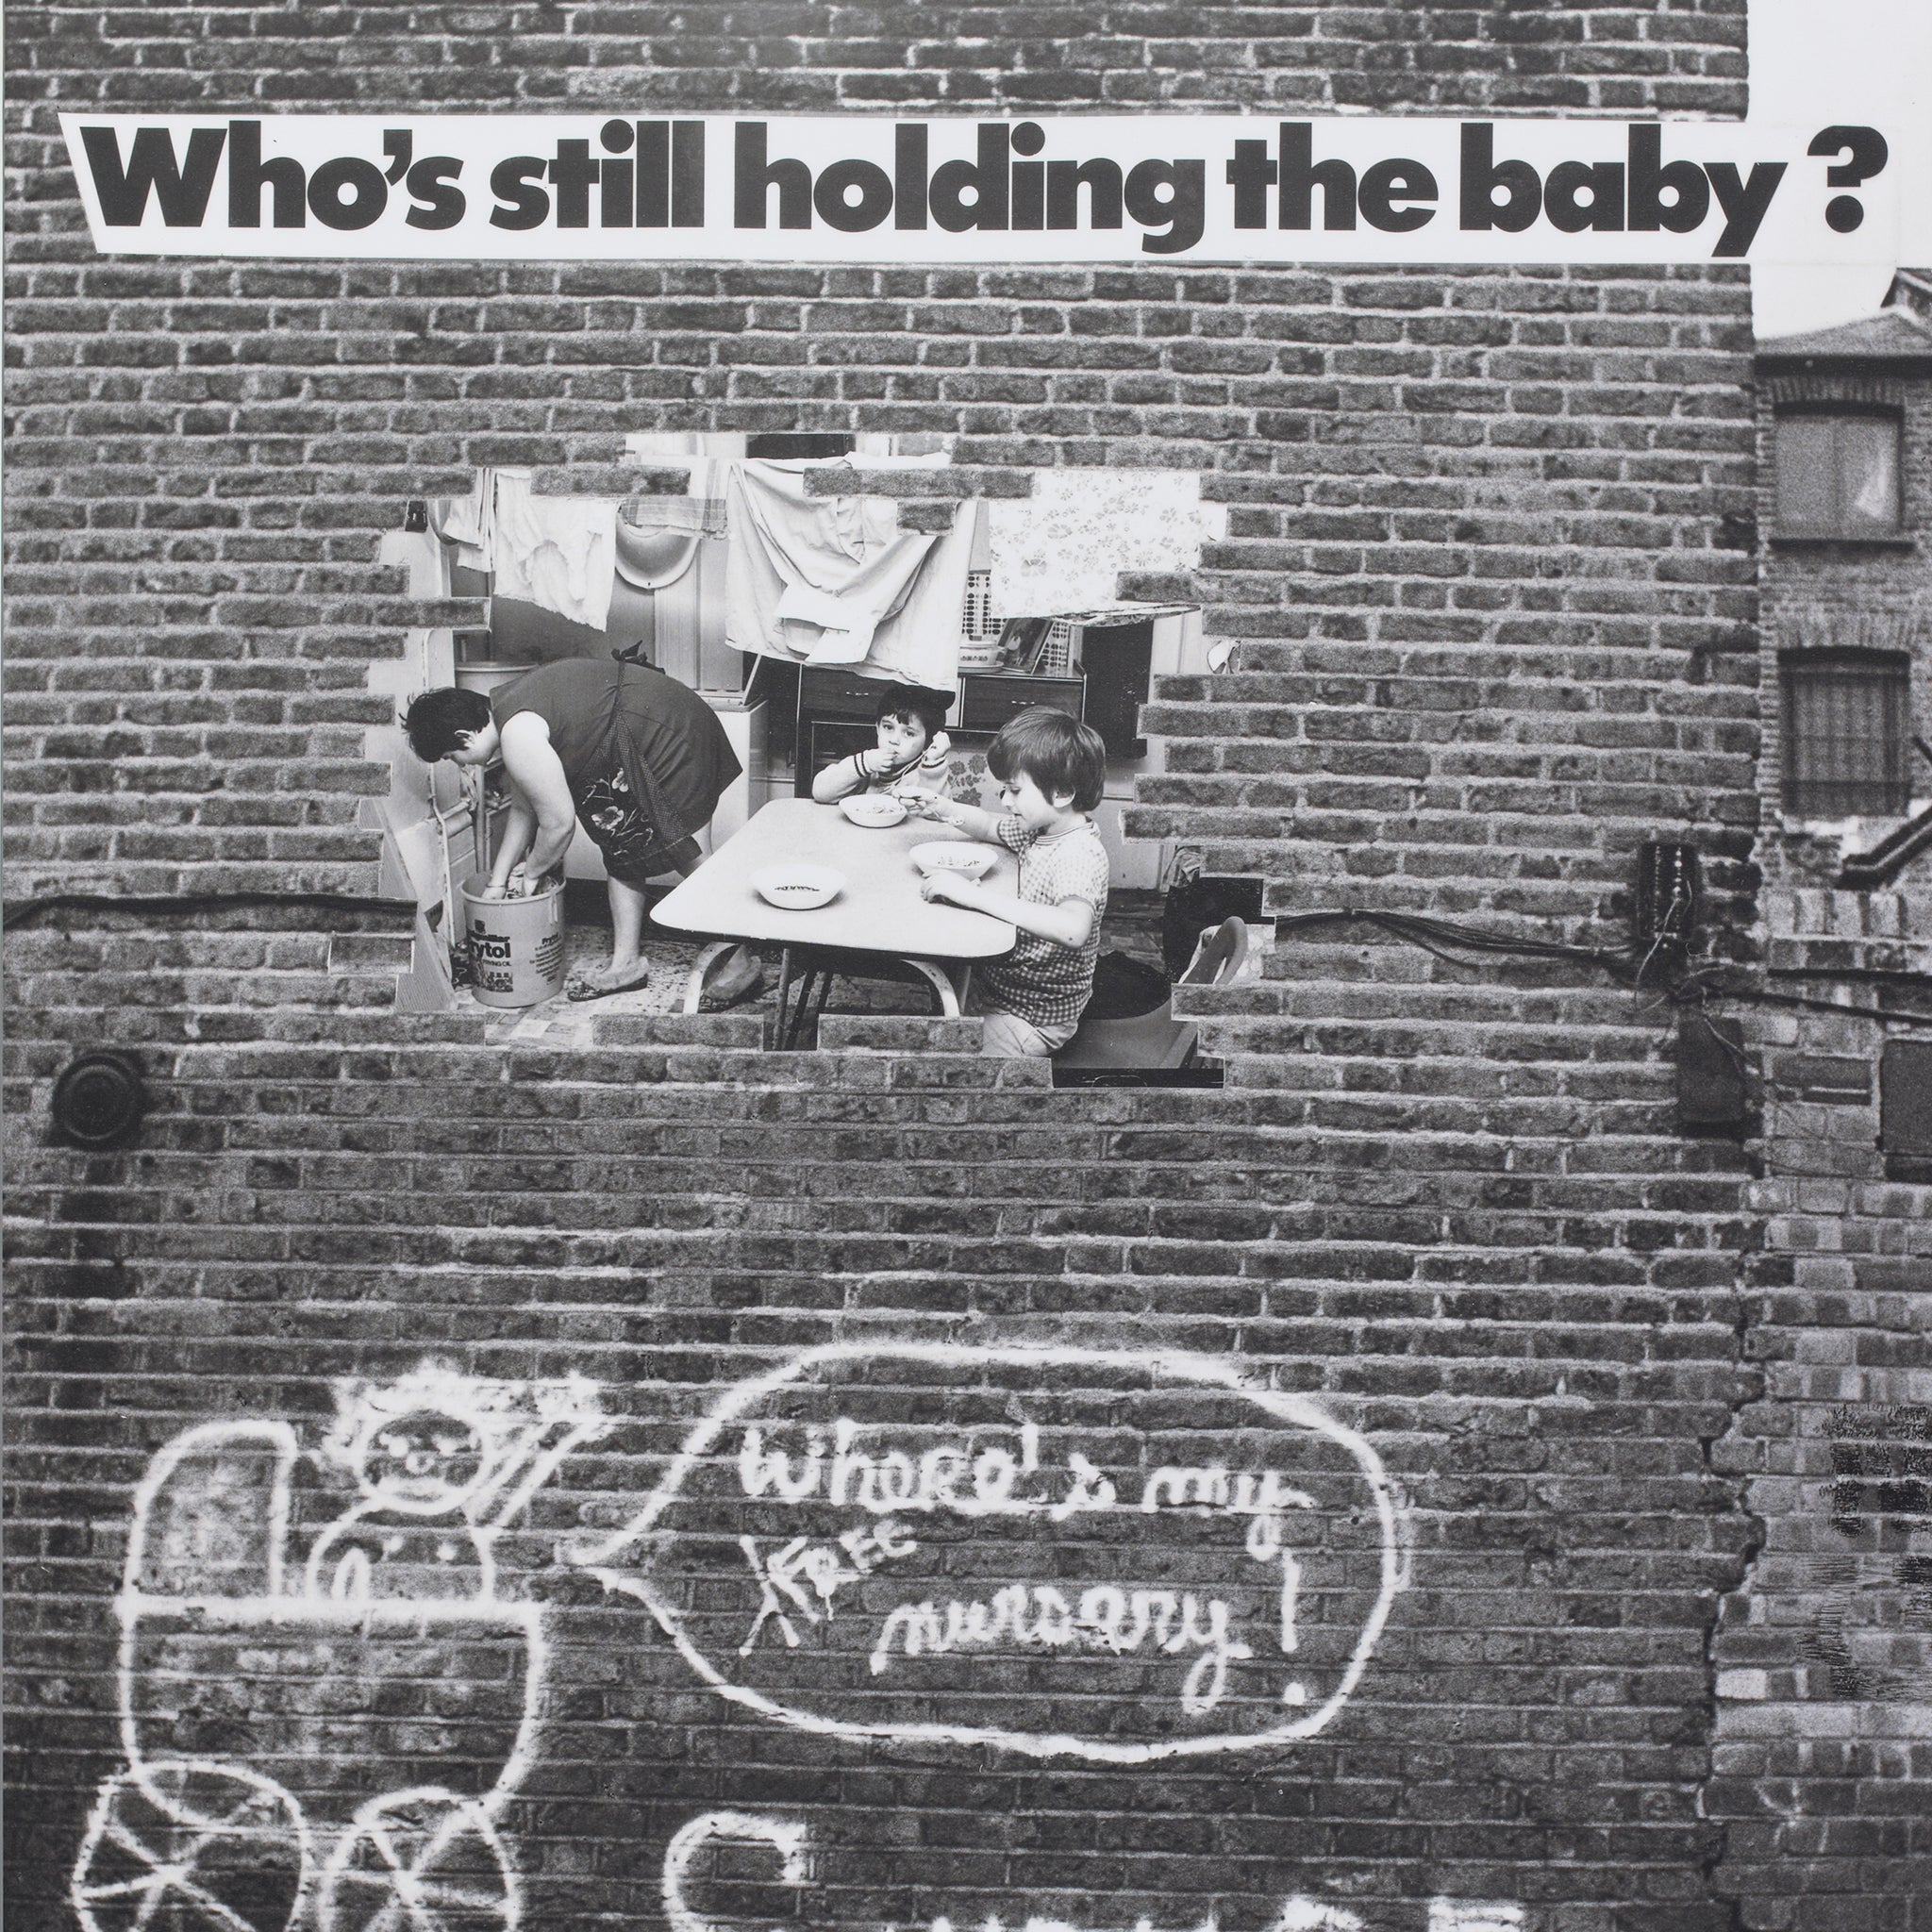 The Hackney Flashers’ ‘Who’s Holding the Baby?’ (1978)